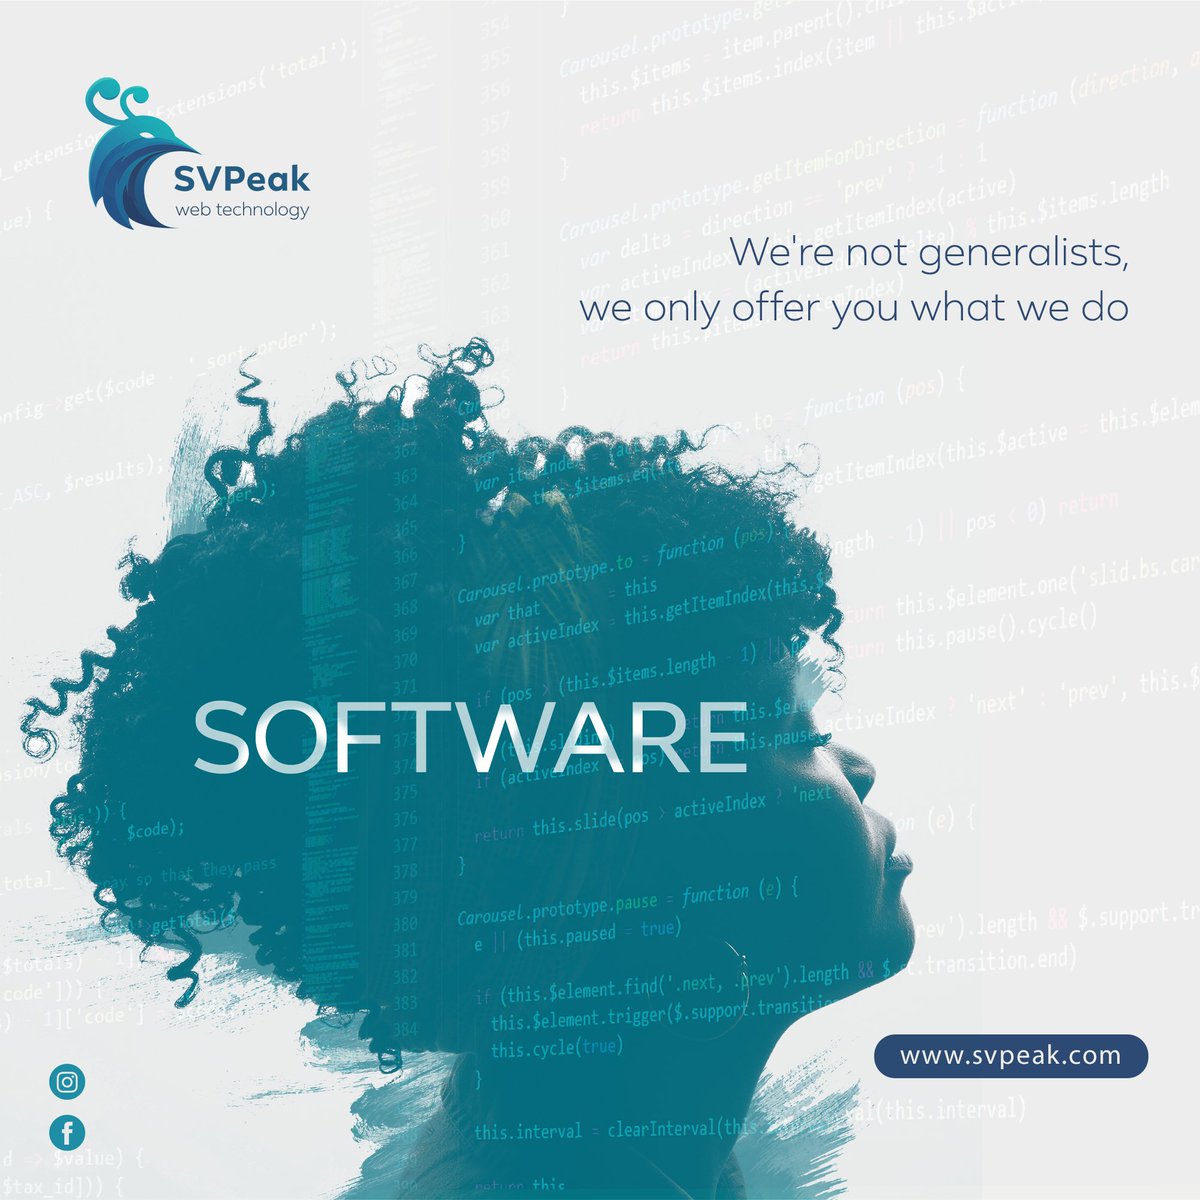 We are a digital product engineering and IT talent solutions company that aims to solve complex software engineering problems @www.svpeak.com
#invoicingsoftware #invoicing #invoice #onlineinvoicing #billingsoftware #crm #invoicingsystem #software #svpeakwebtechnology #svpeak